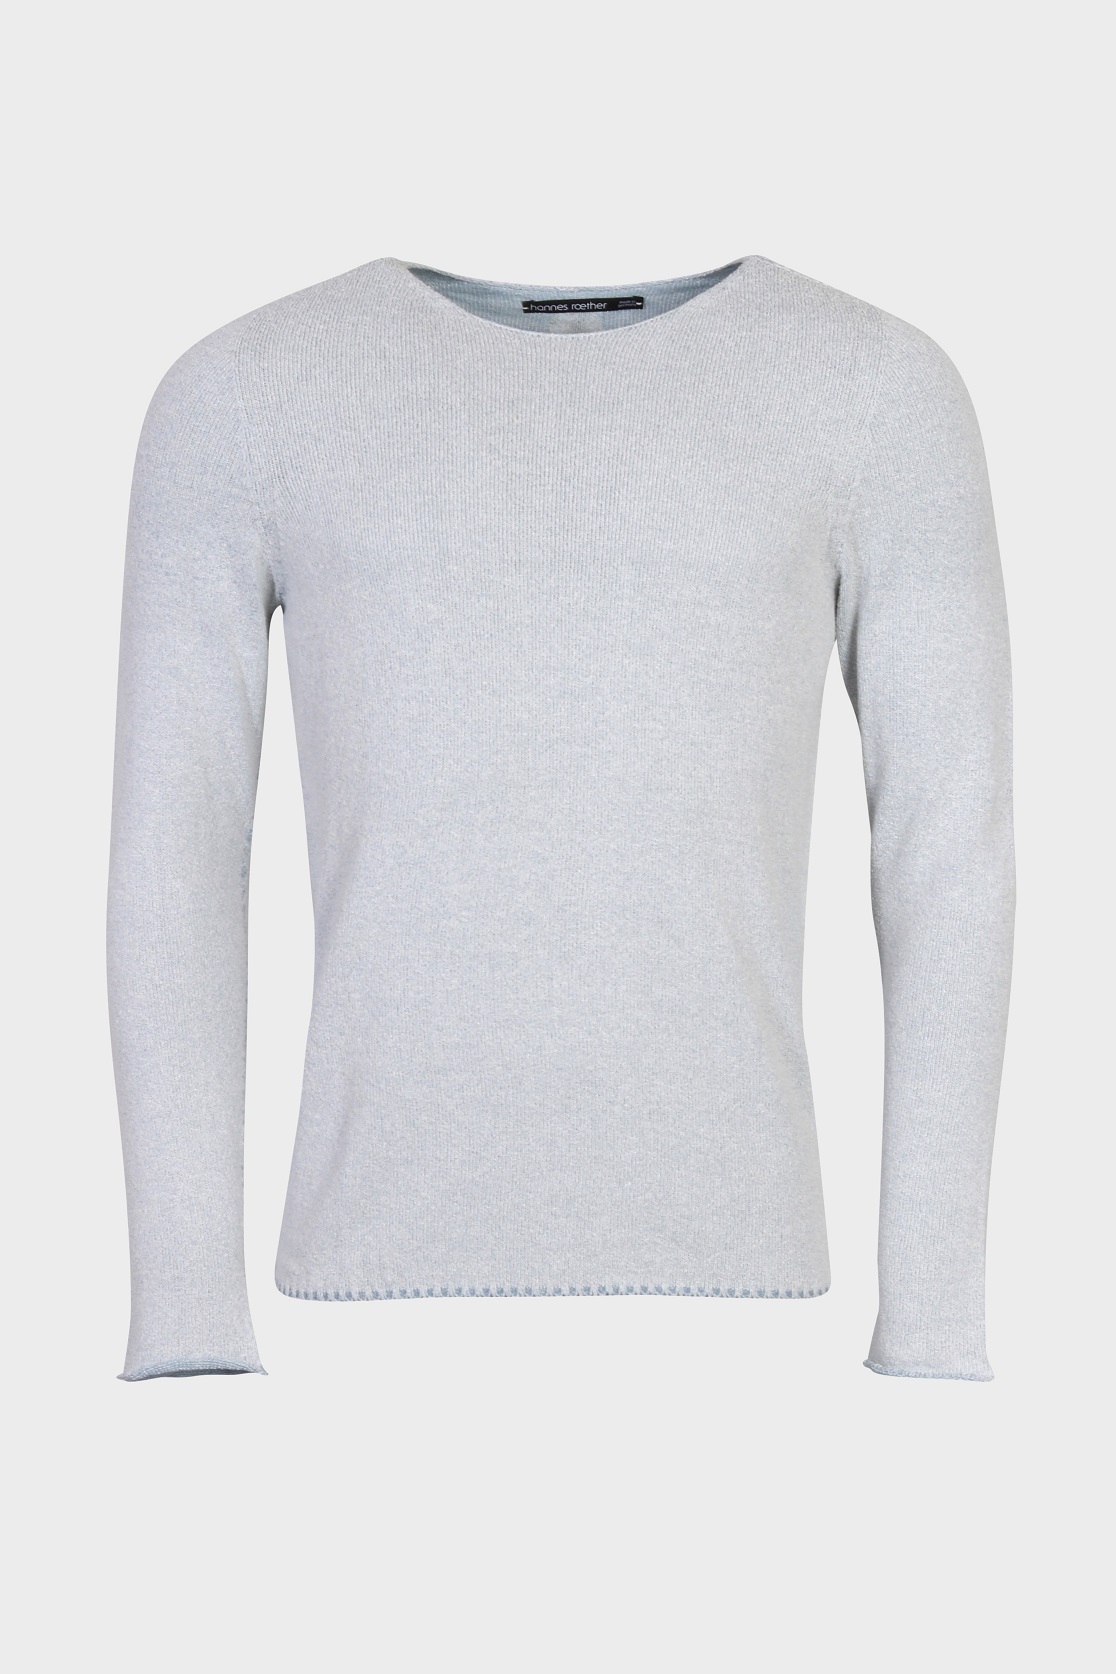 HANNES ROETHER Knit Sweater in Light Blue S